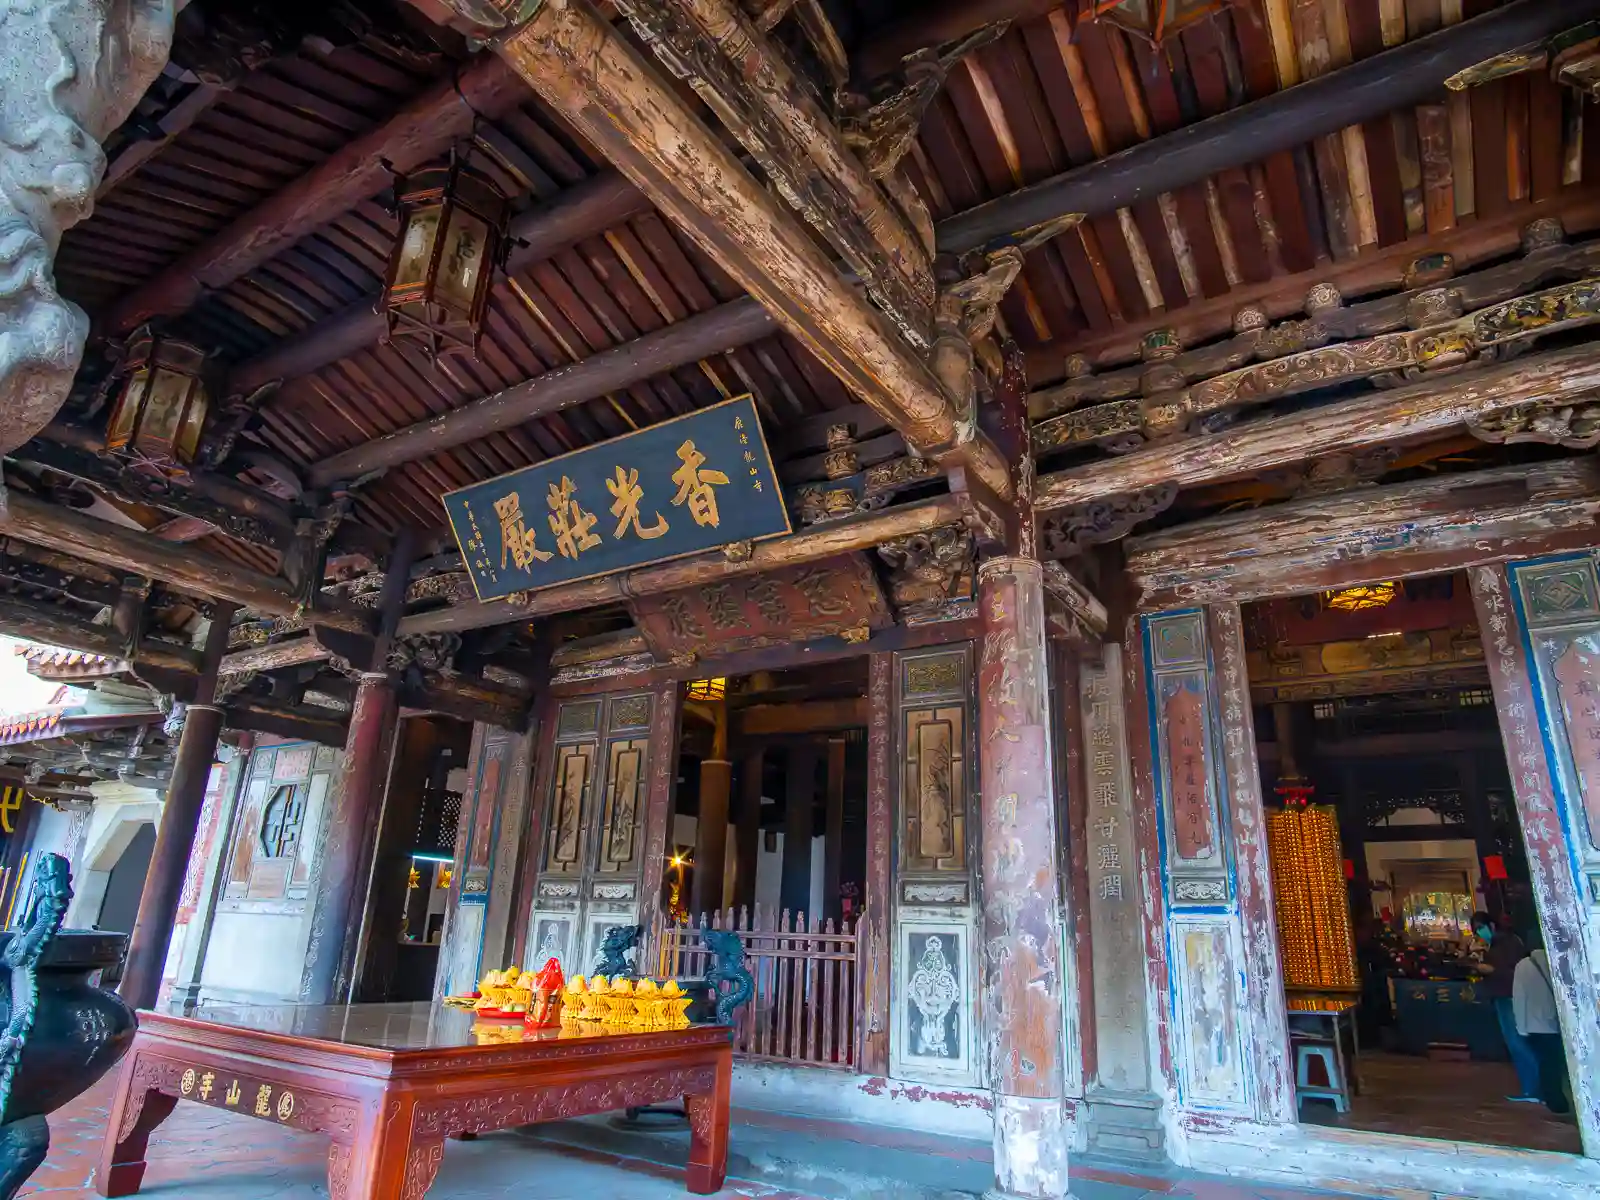 An offering table sits in front of the entrance to the main hall, which is decorated with many hand-painted wooden panels.